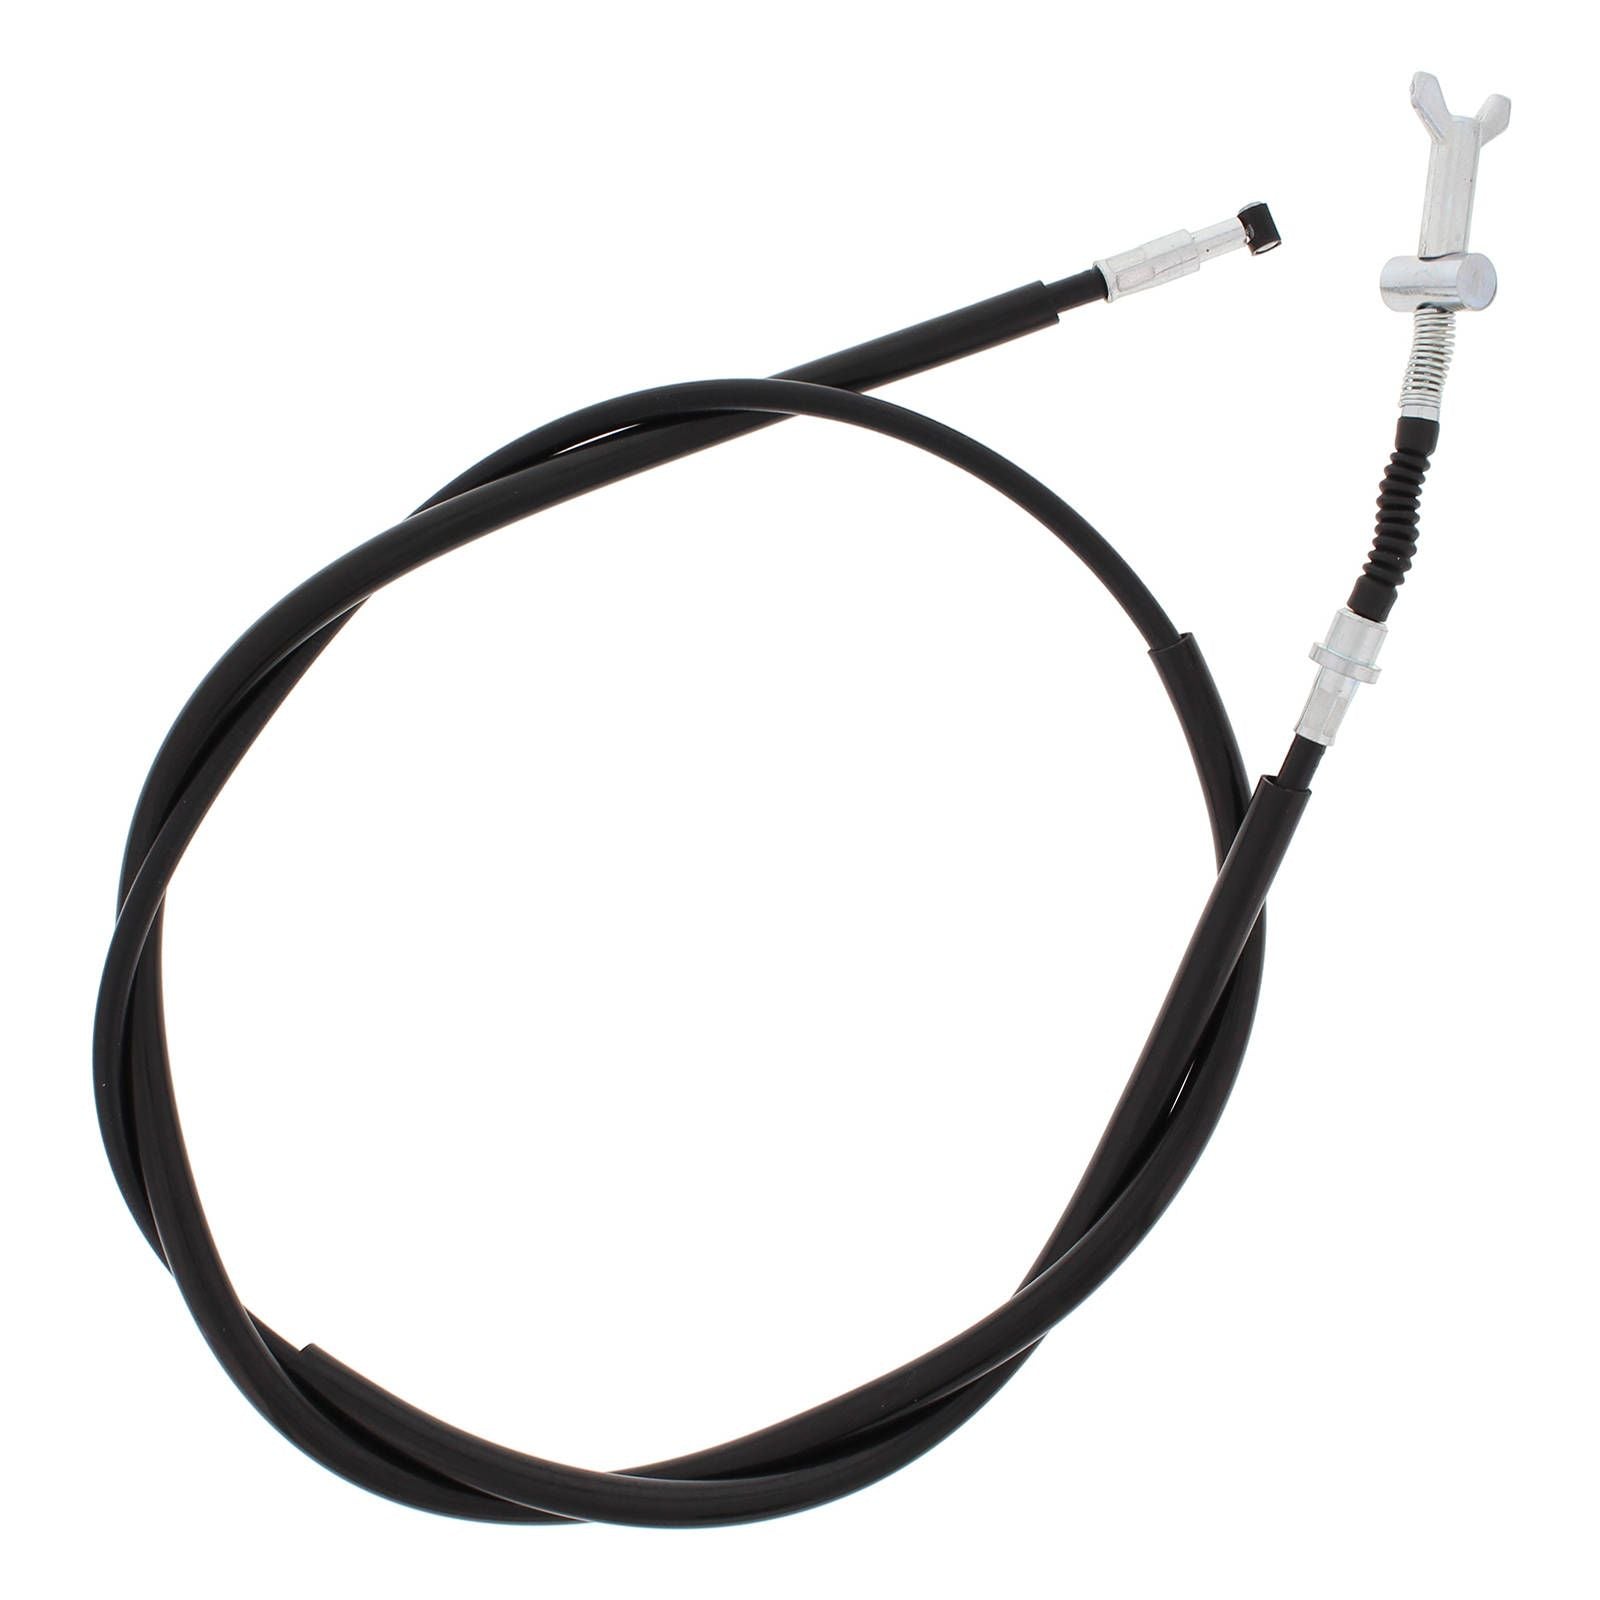 New WHITES Motorcycle Hand Brake Cable - Rear #WPCC01043